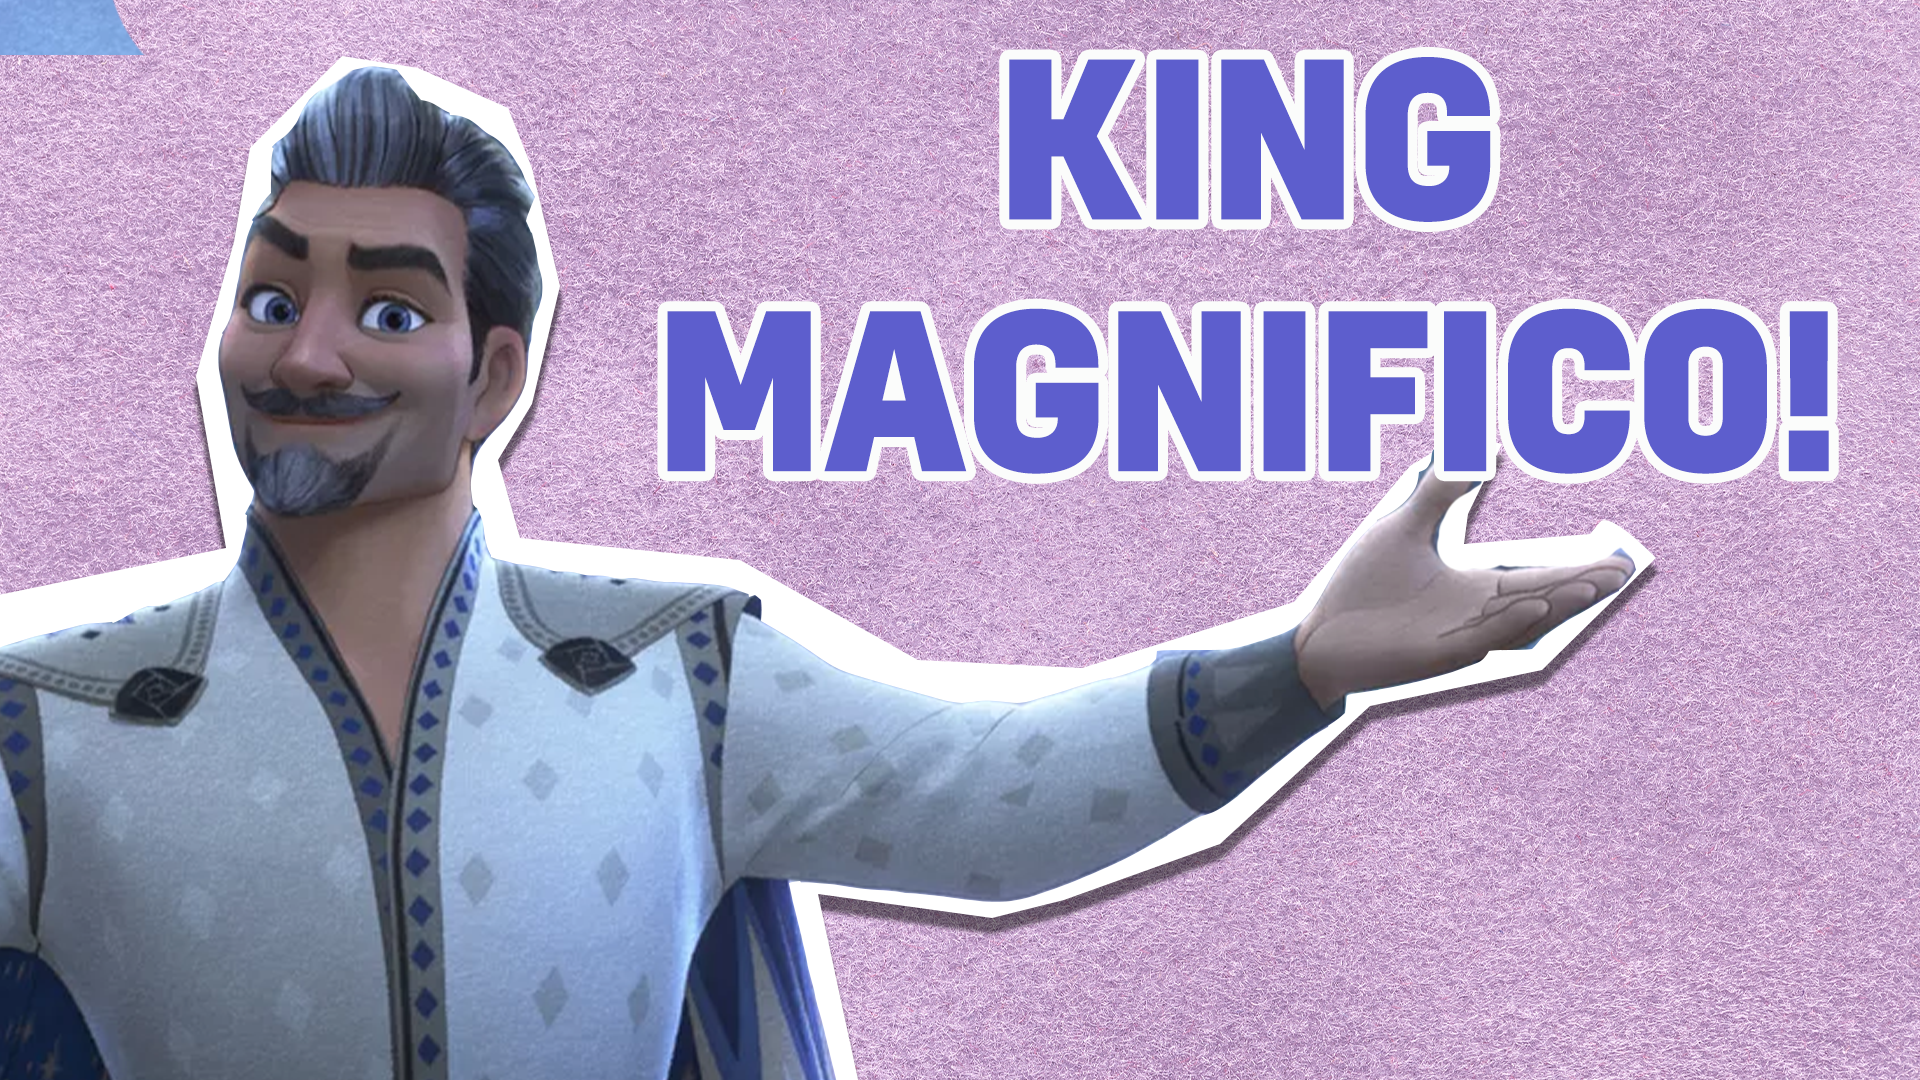 You're King Magnifico! You're ambitious, clever and you love being in charge! Don't let it go to your head though!